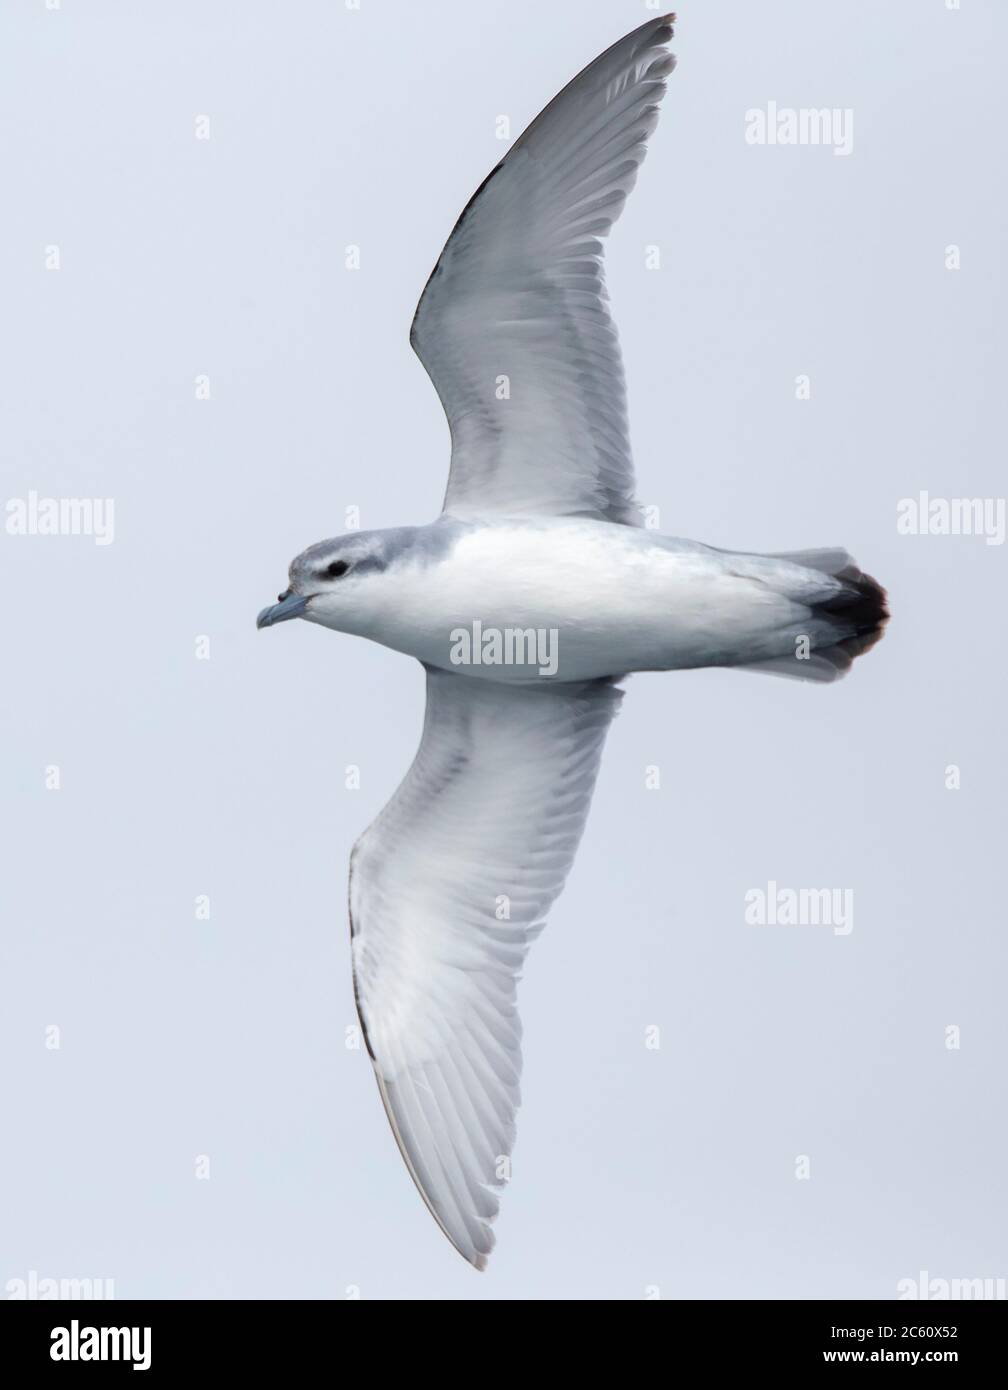 Fulmar Prion (Pachyptila crassirostris) in flight over the southern pacific ocean of subantarctic New Zealand. Seen from below, showing under wings. Stock Photo